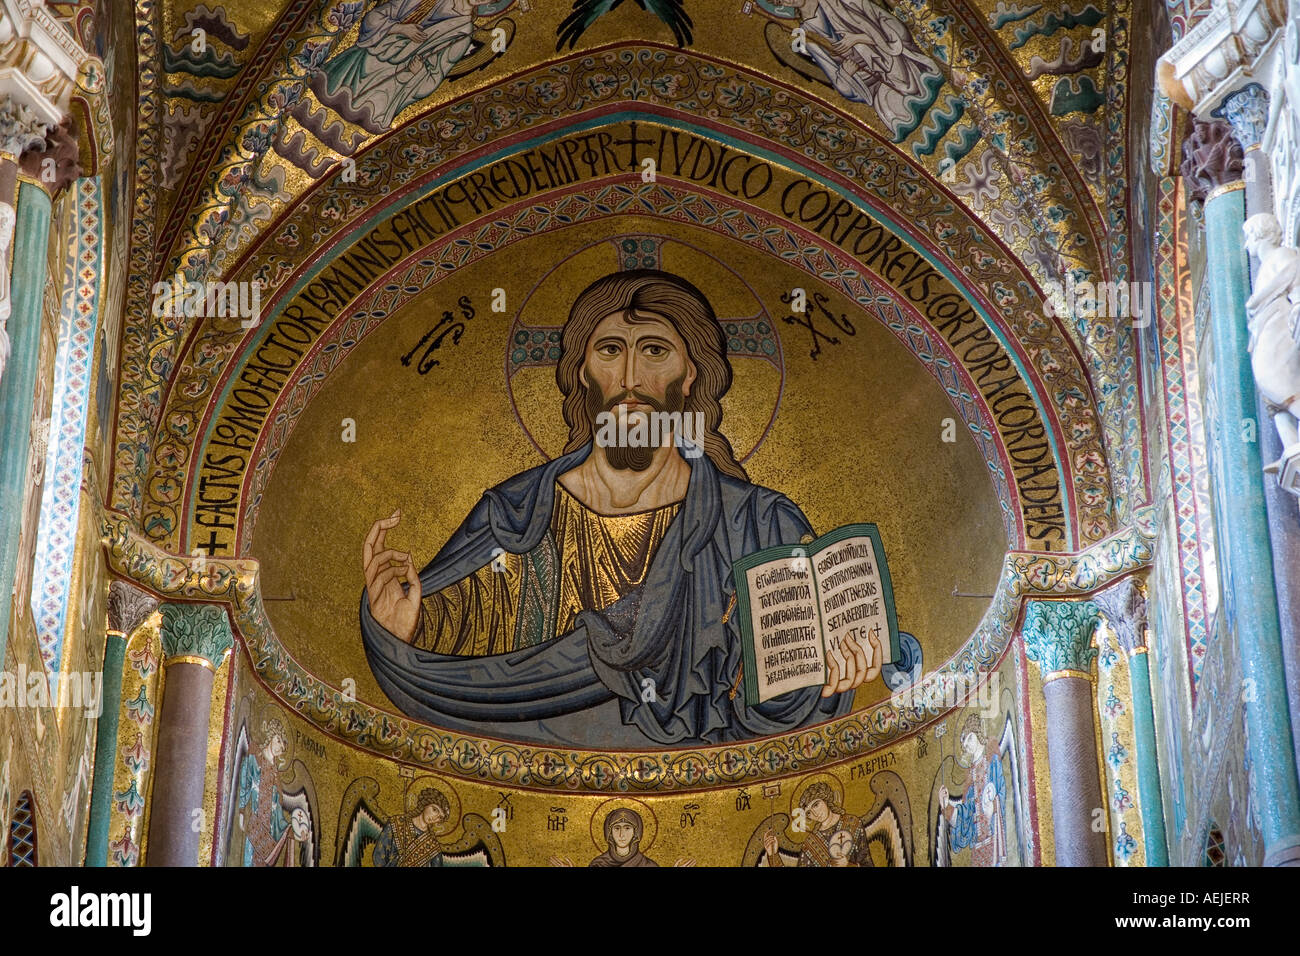 Christus Pantokrator mosaic in the apsis of the cathedral, Cefalu, Sicily, Italy Stock Photo